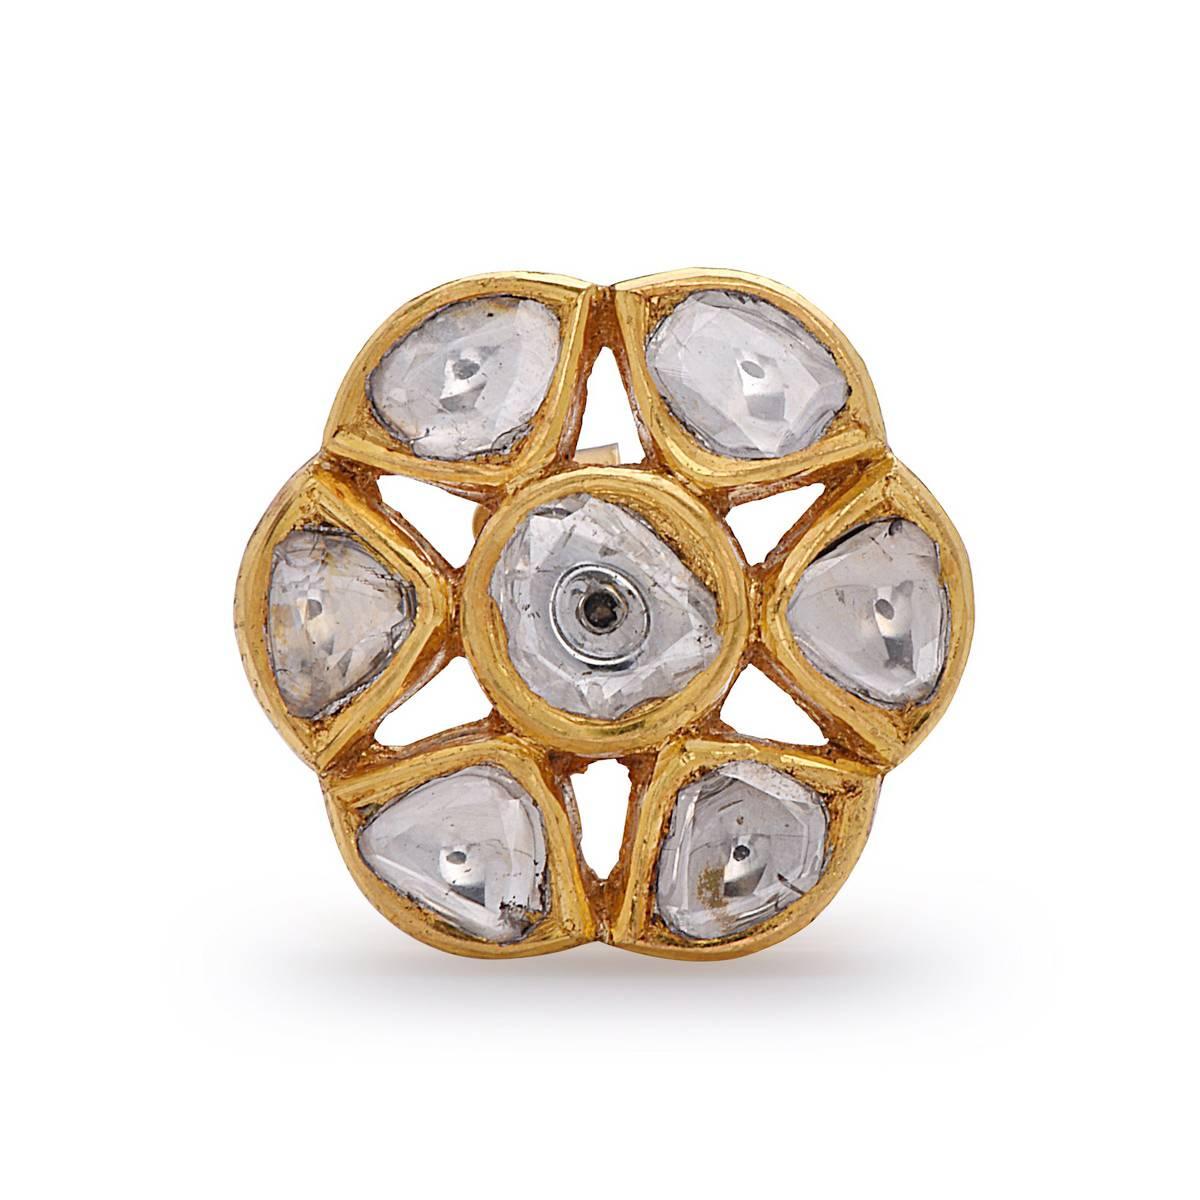 Unique Floral Rose cut Diamond Stud Earring in 18K Yellow Gold is a gorgeous piece to own.

Earring Closure: Push Post
18k: 8.51gms
Diamond: 2.08ct                                                                                                  